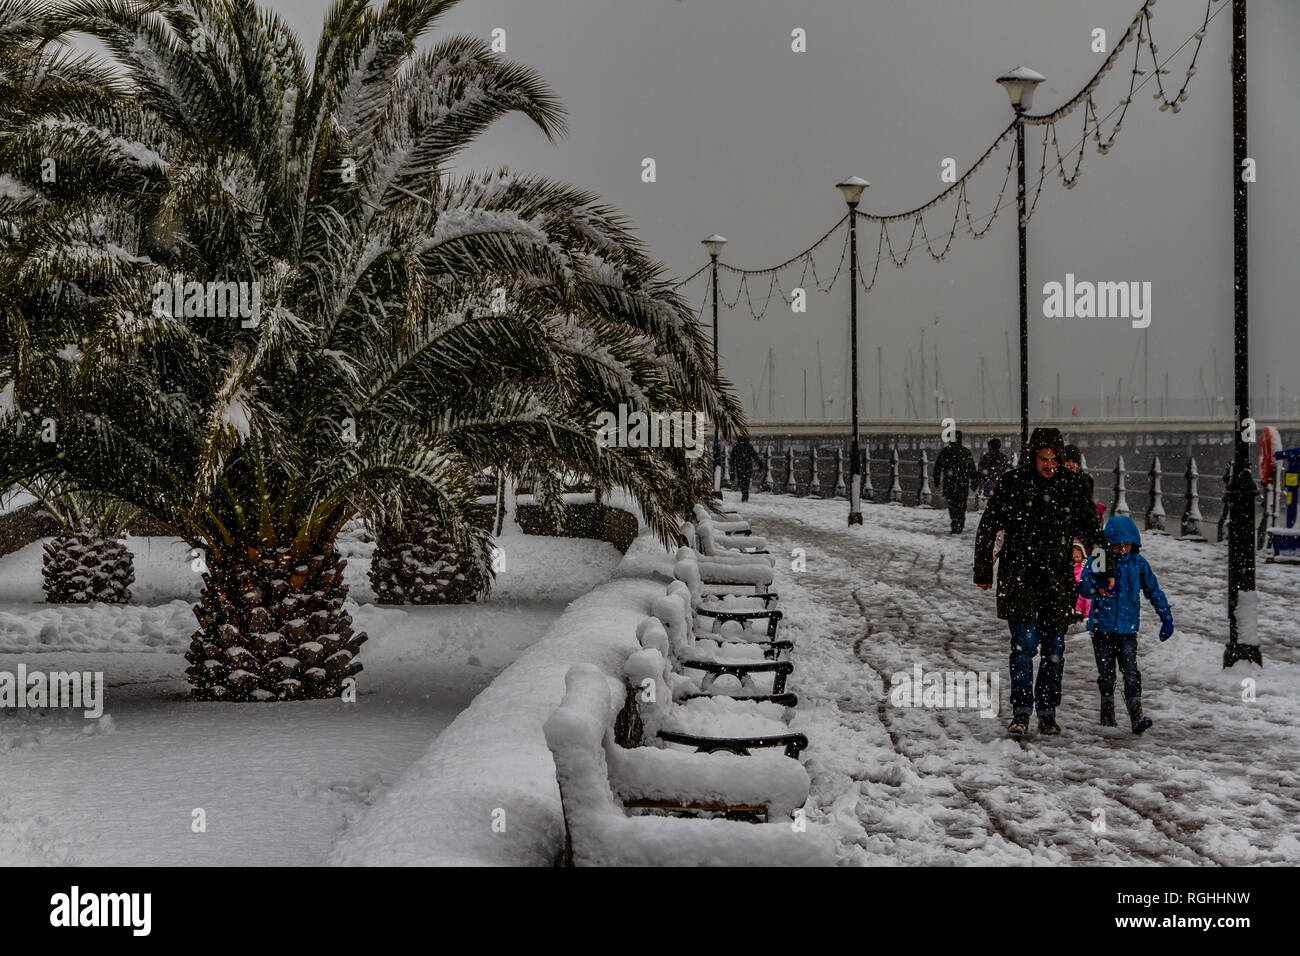 People struggle with the snow and icy conditions while walking along Torquay seafront during the 'Beast from the East' storm in March 2018. Stock Photo